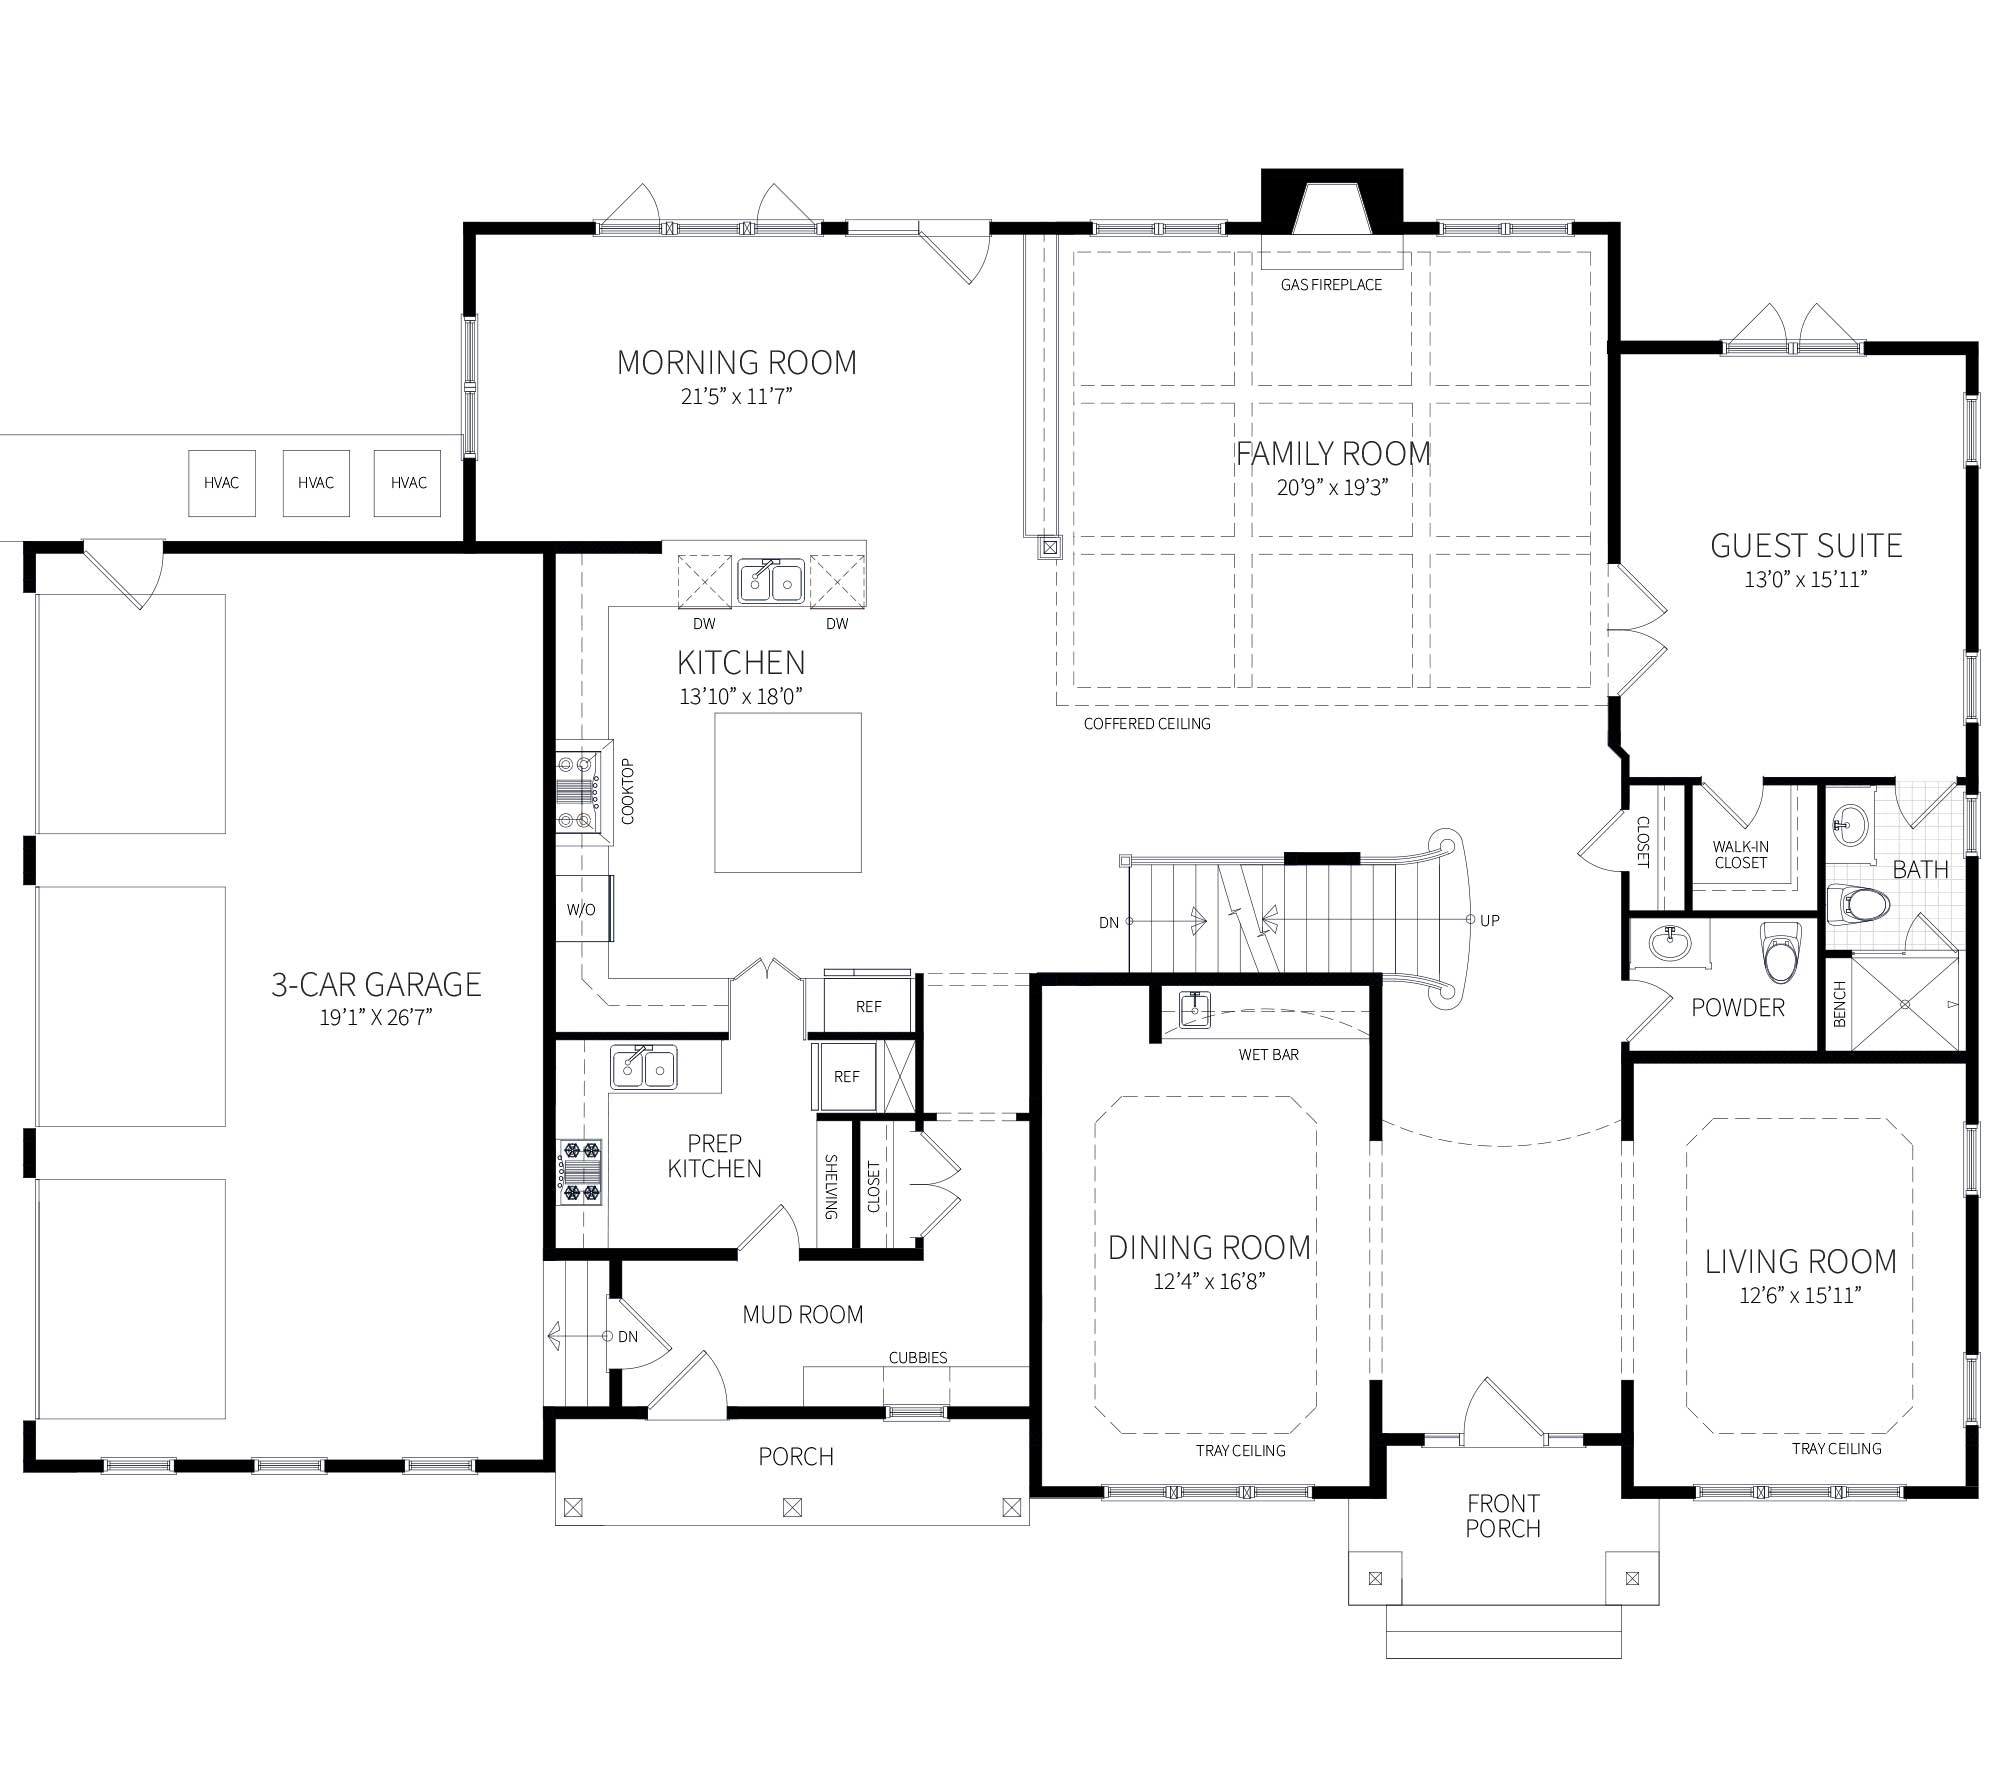 The first floor plan of the Rock Run model home showing 3-car garage, secondary front entrance, prep kitchen, guest suite and two-story family room with coffered ceiling.